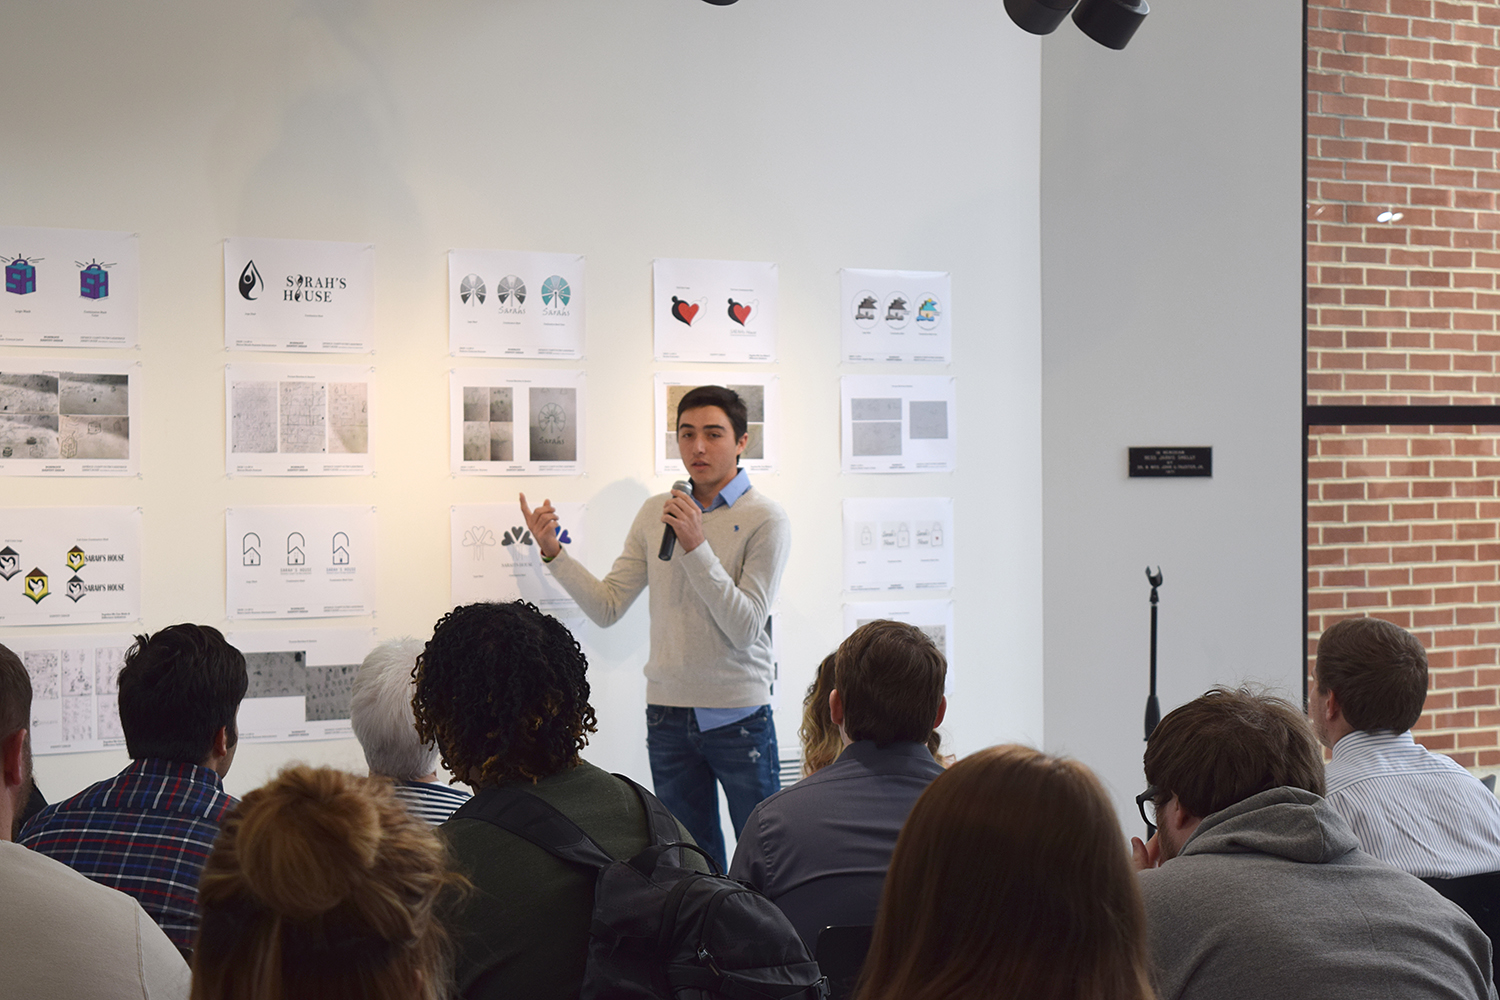 Student Federico Gutierrez holding a microphone and speaking in front of an audience who is watching him point at his design on the exhibit wall.